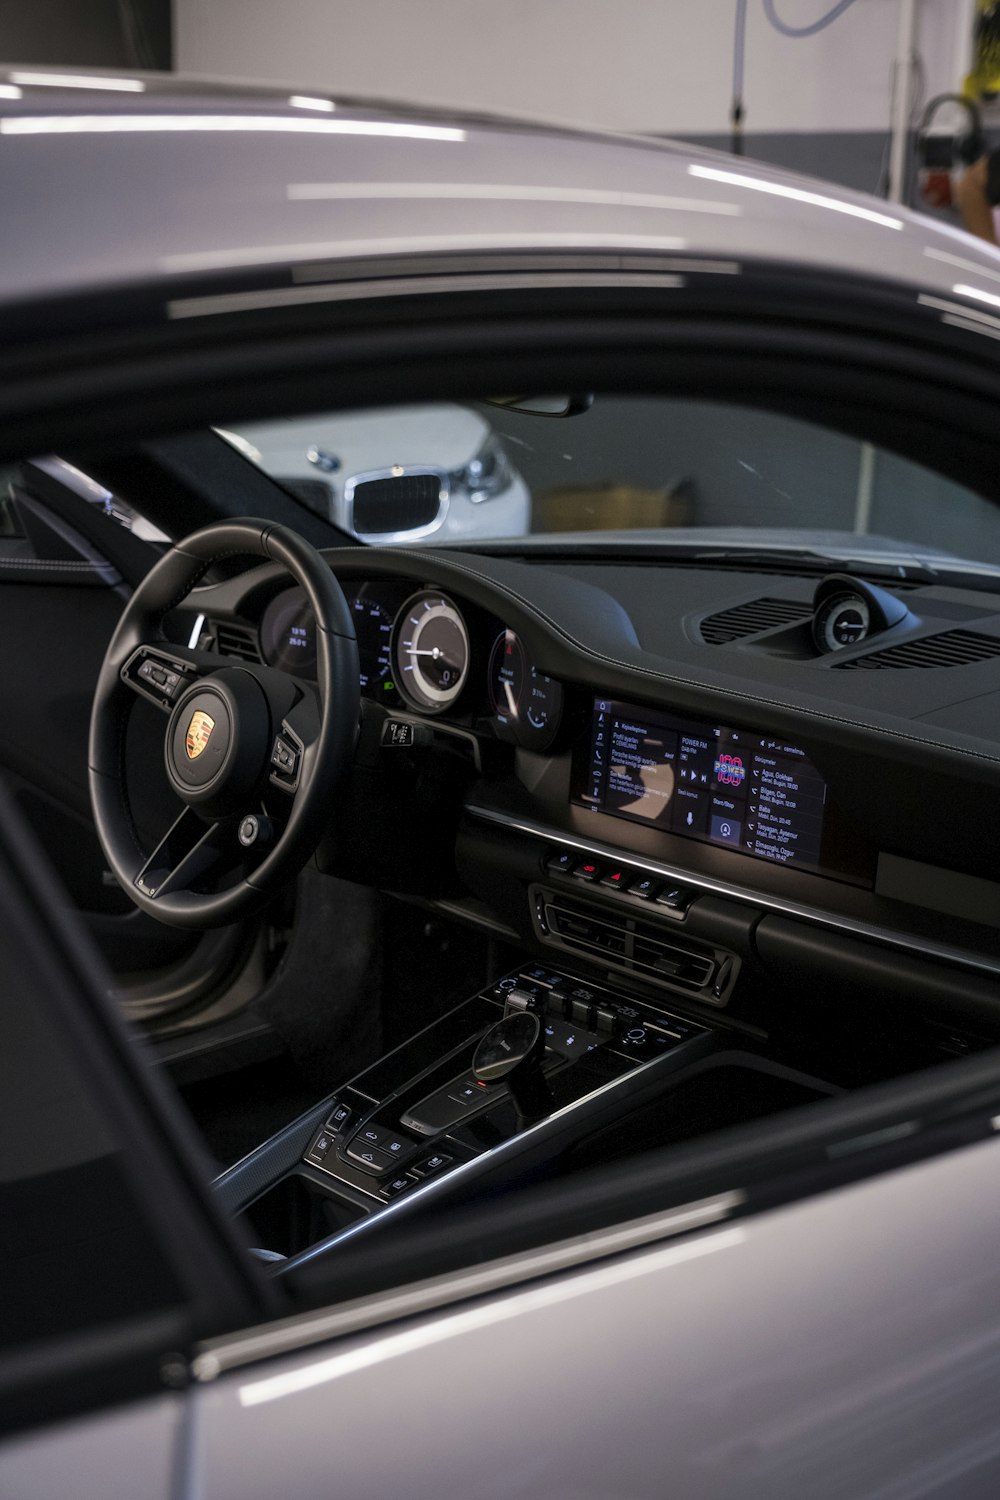 the interior of a sports car is shown